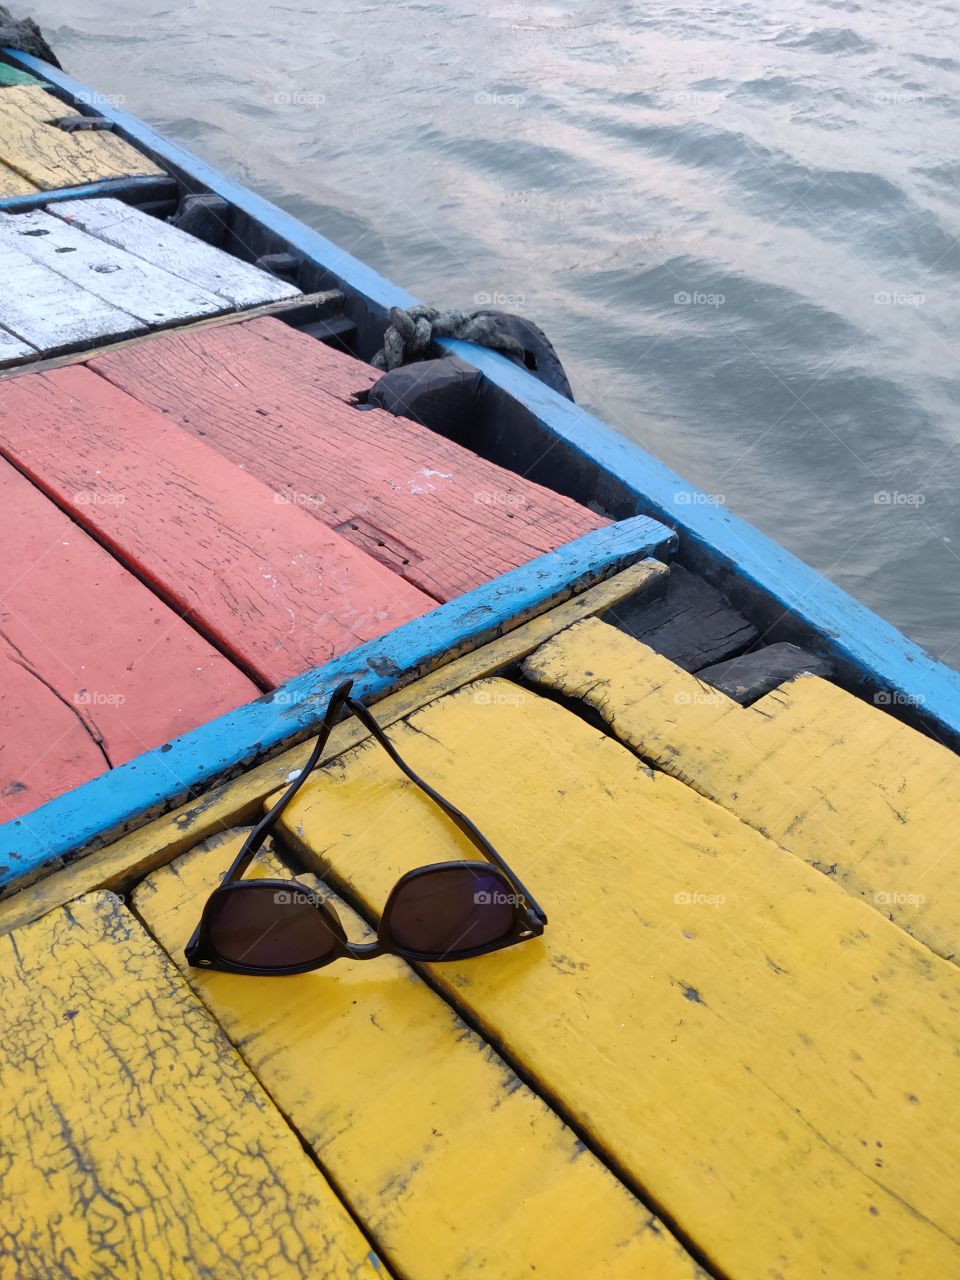 black sunglasses kept on a colorful deck of a wooden boat floating in the water